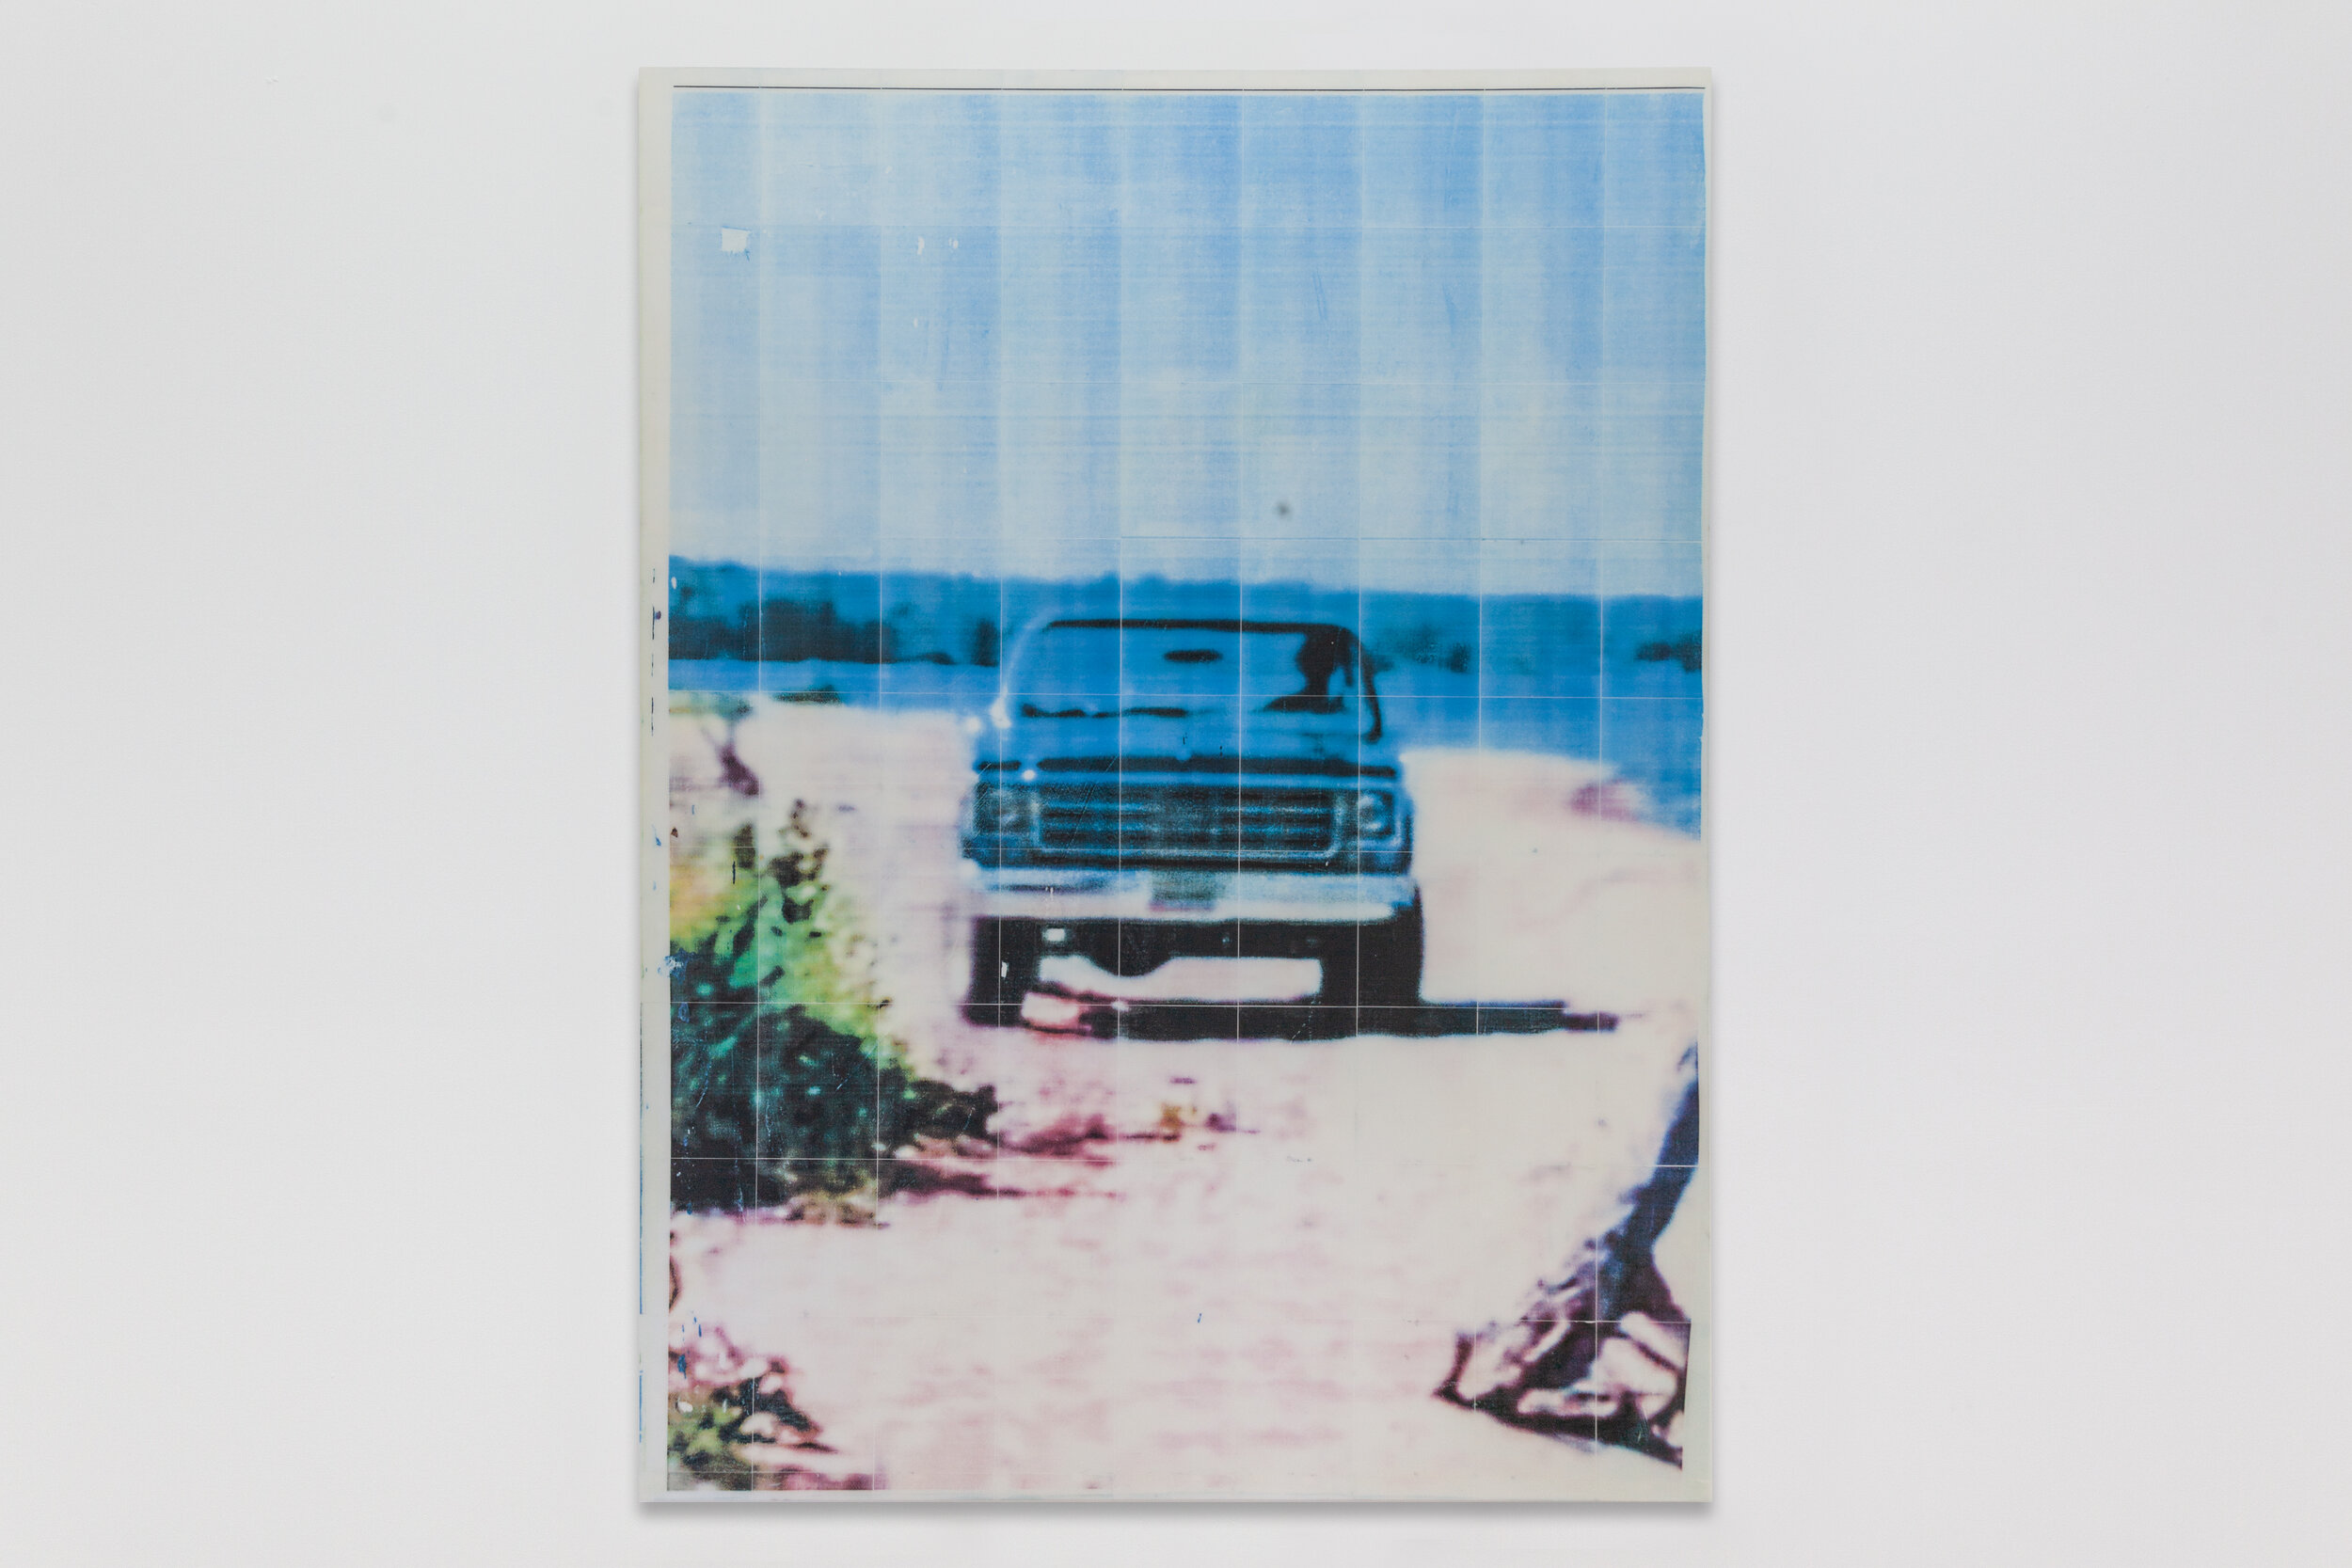  Stephen McClintock,  Bowtie (Truck on the Beach) , 2020, mixed media and resin on aluminum panel, 96 x 72 in. (243.8 x 182.9 cm) 